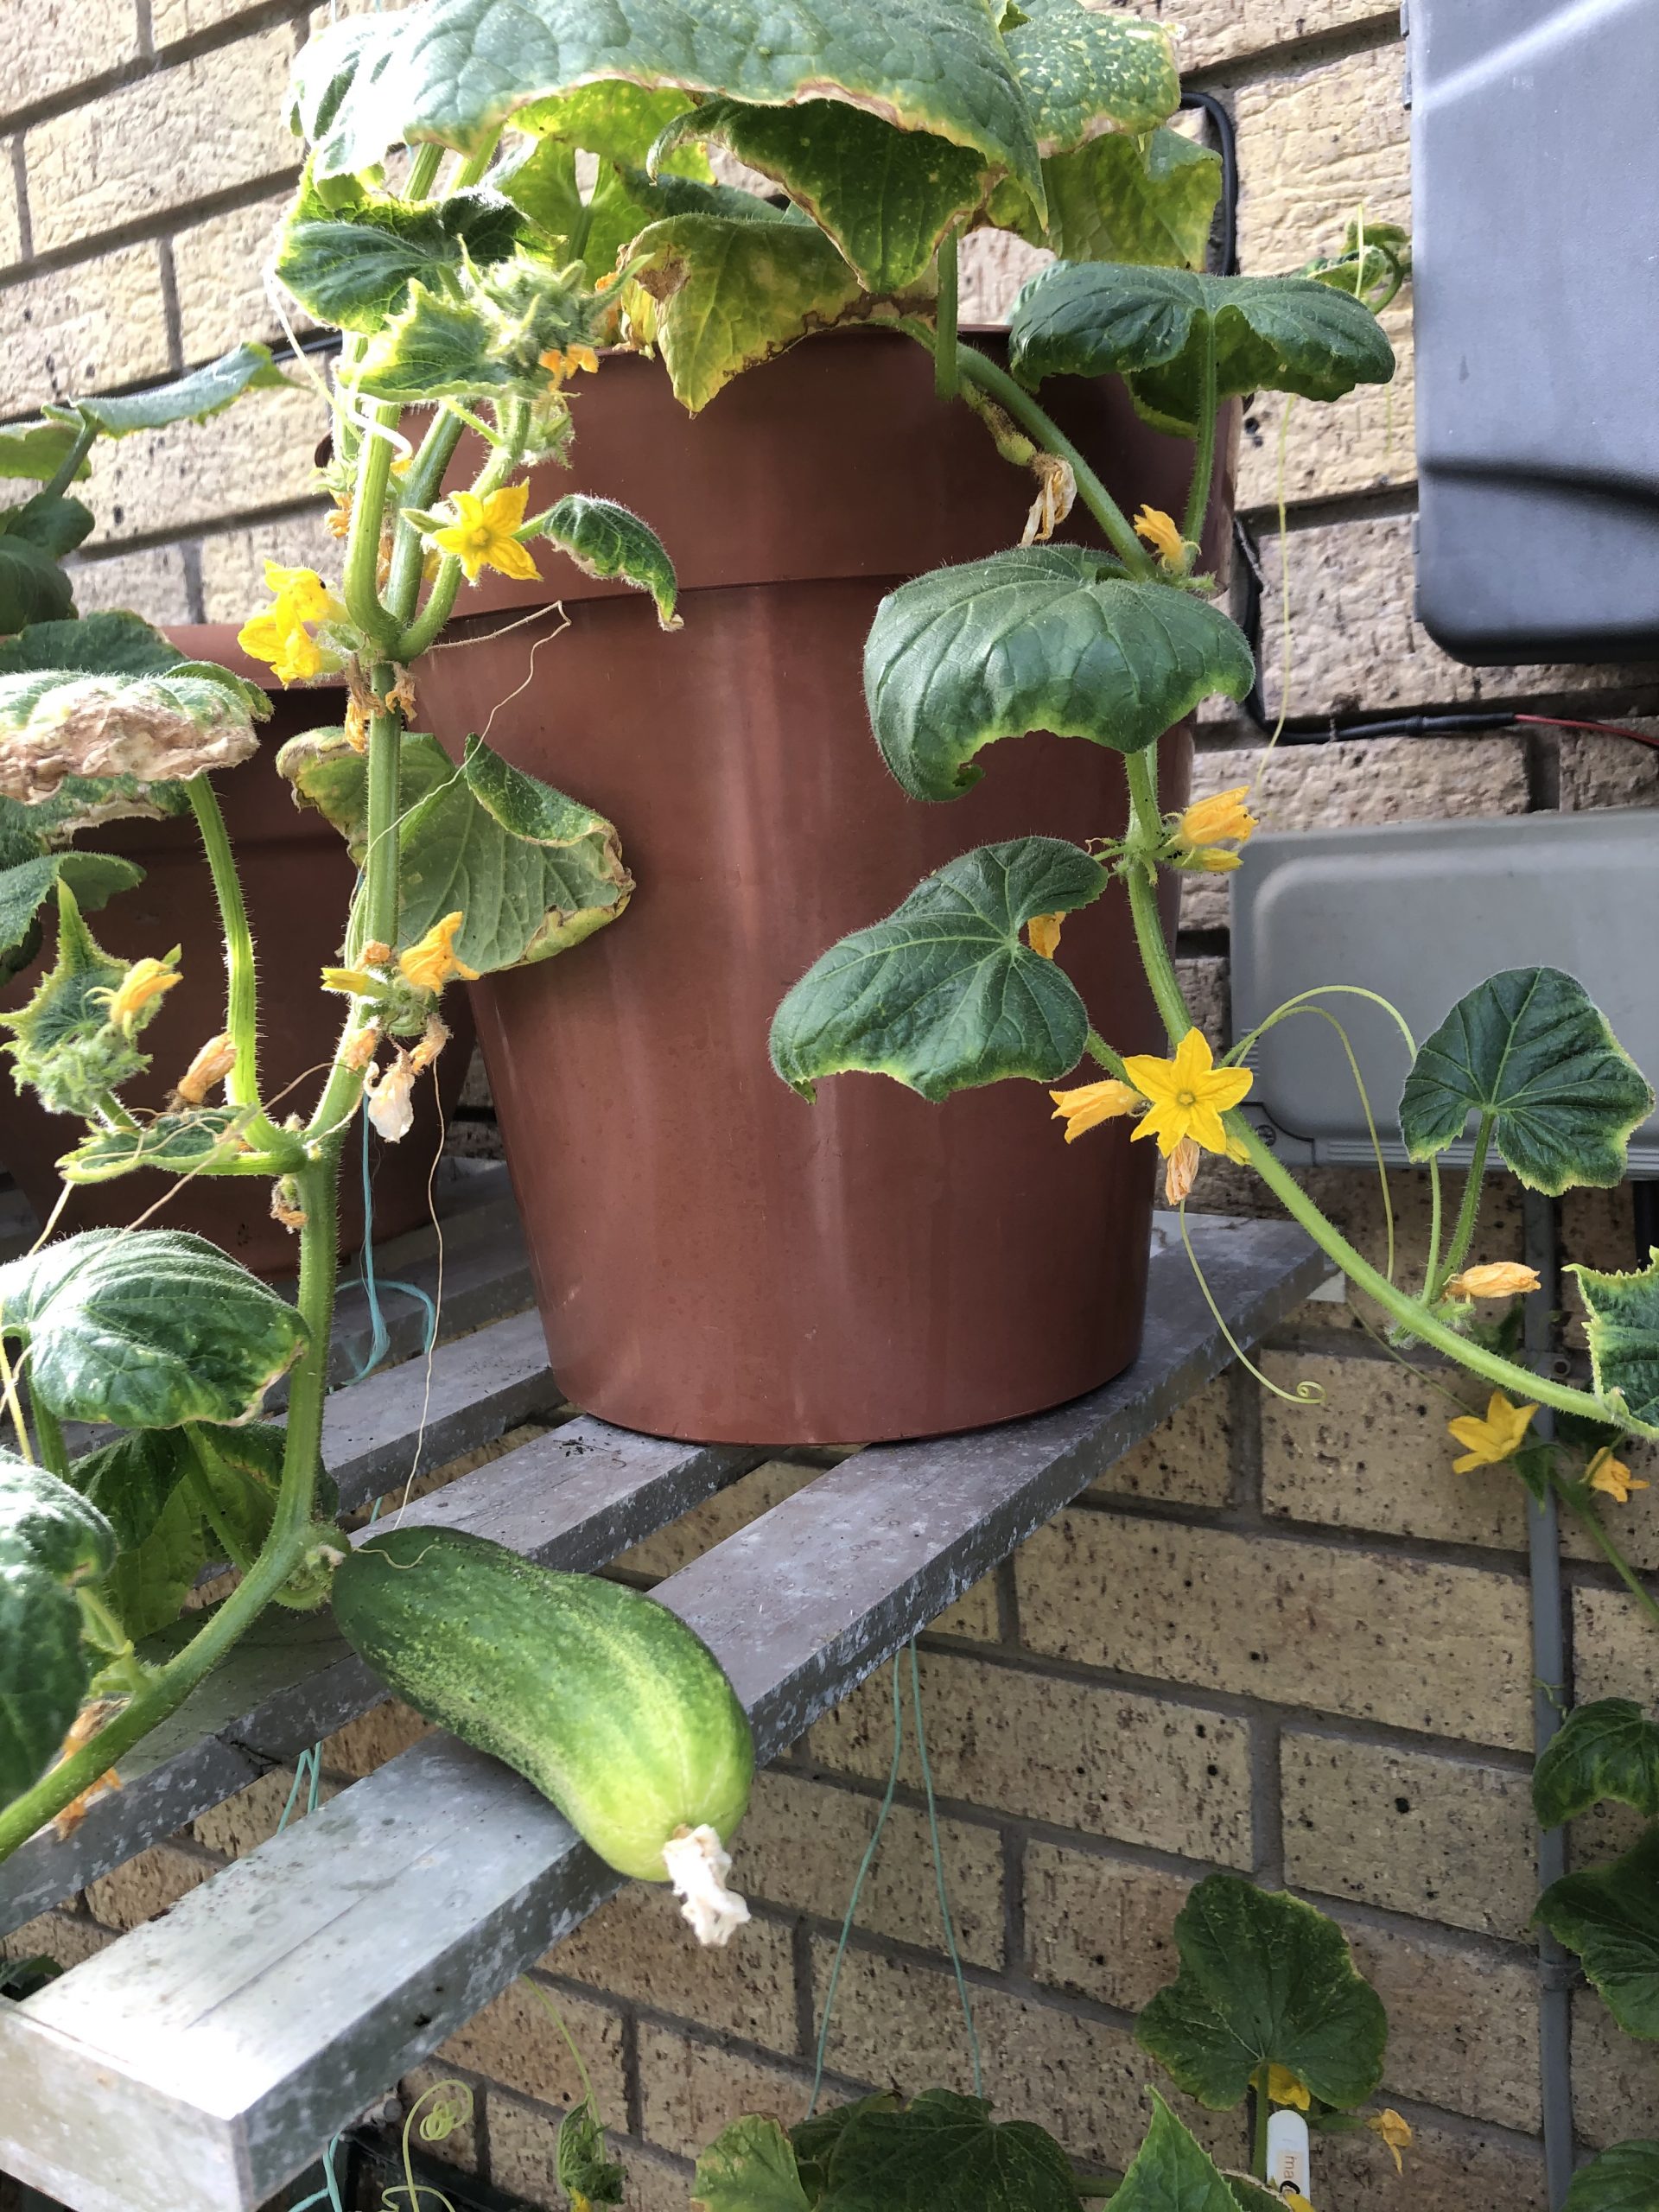 cucumber plant flowering and fruit developing 19/6/20